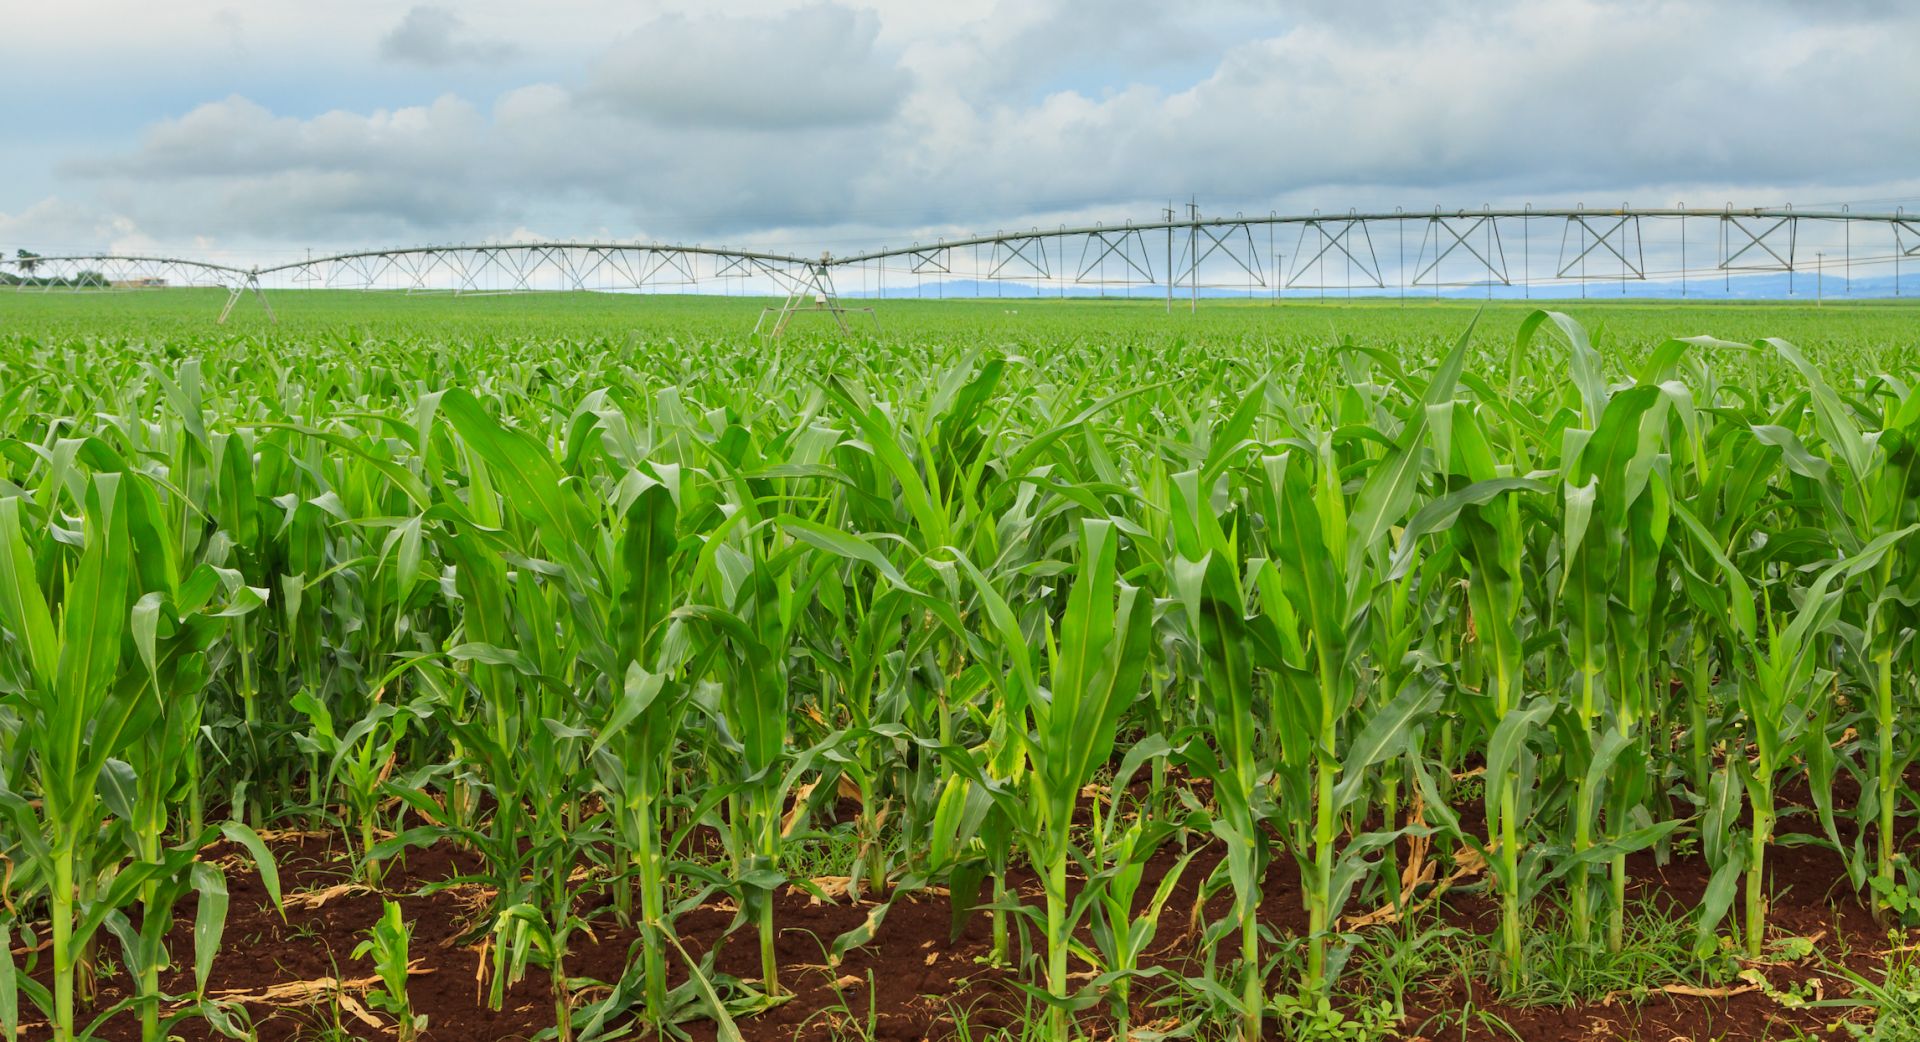 image of irrigation of crops